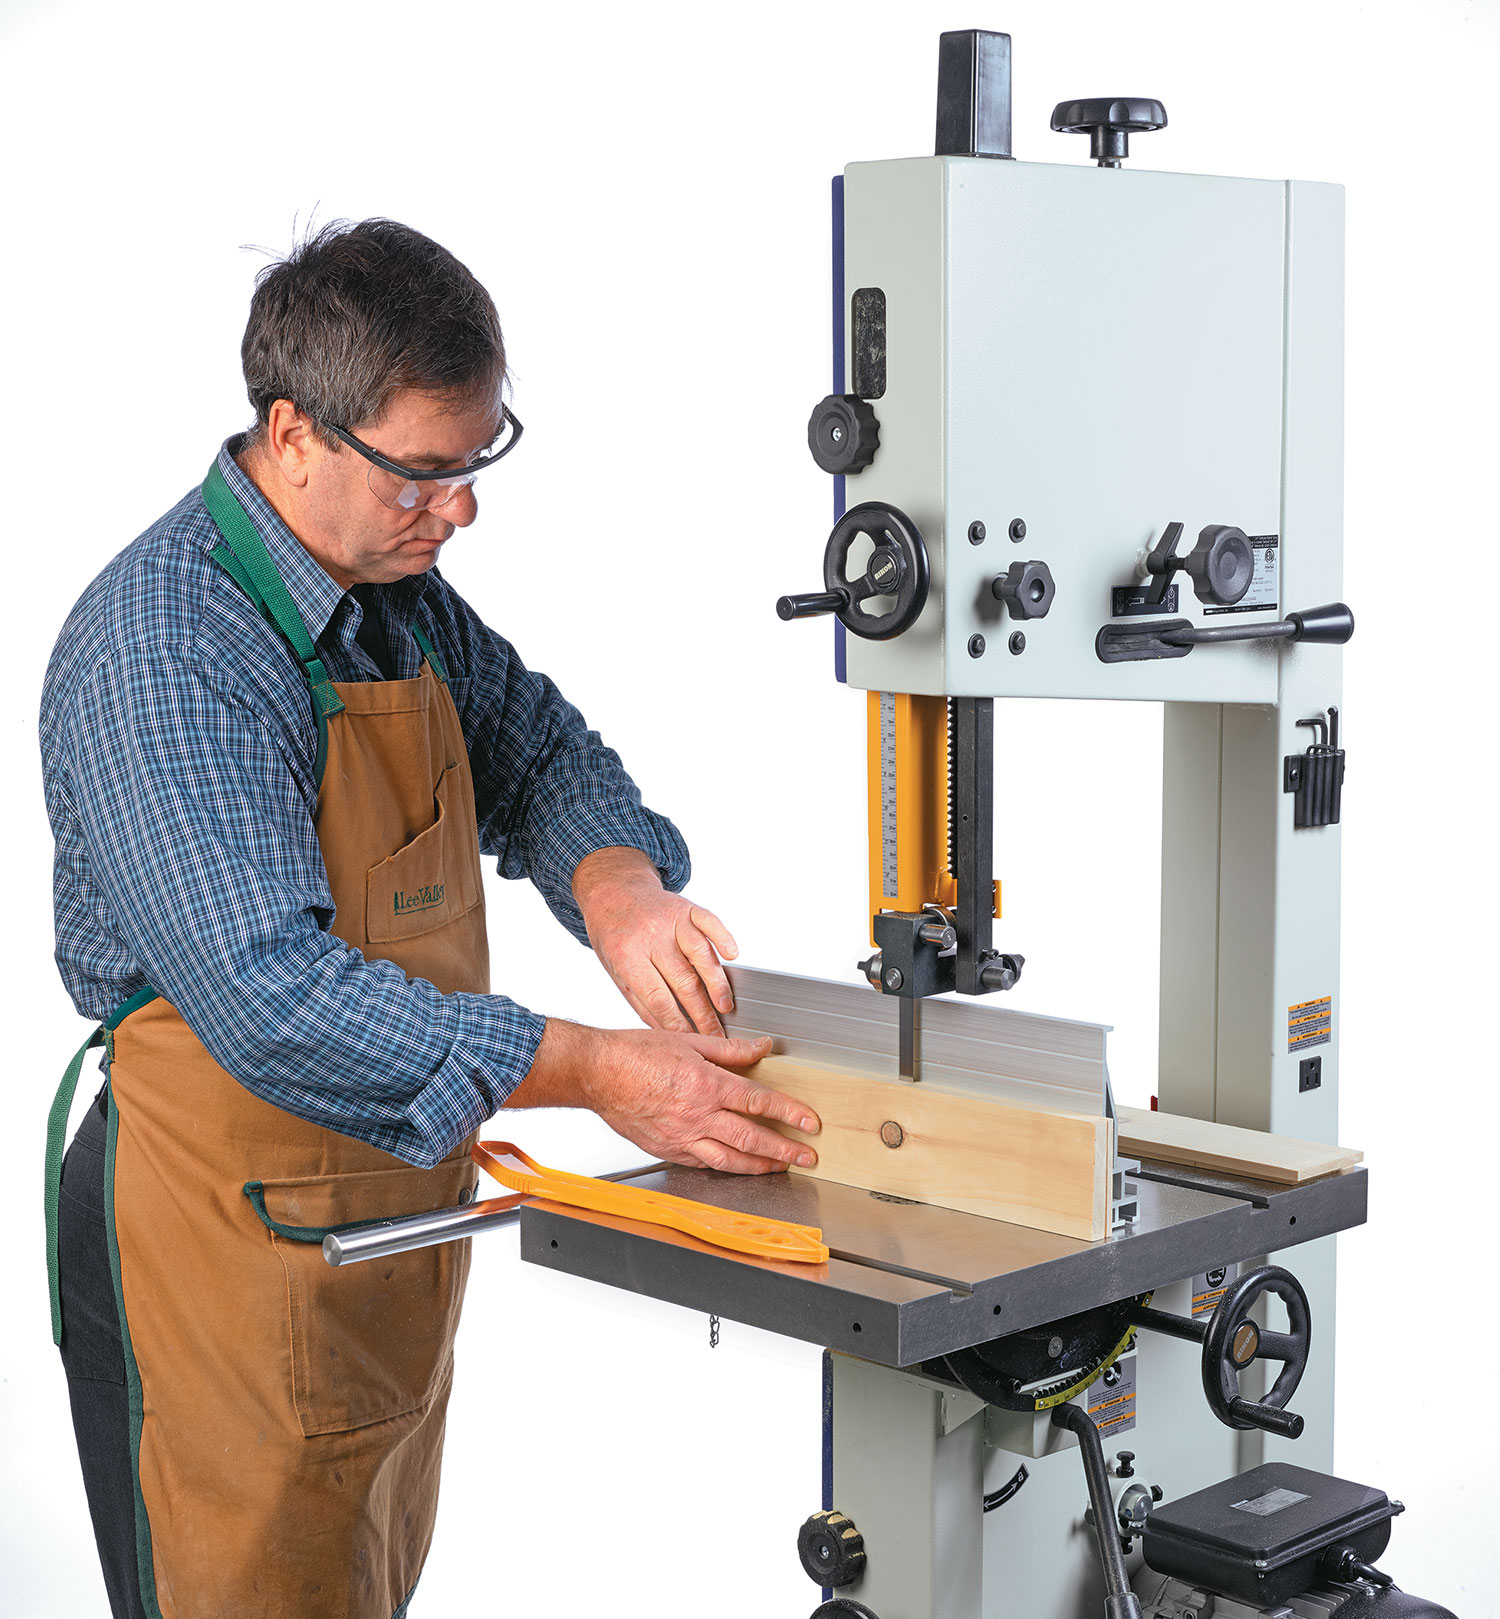 Re-sawing on a Rikon 14” bandsaw.